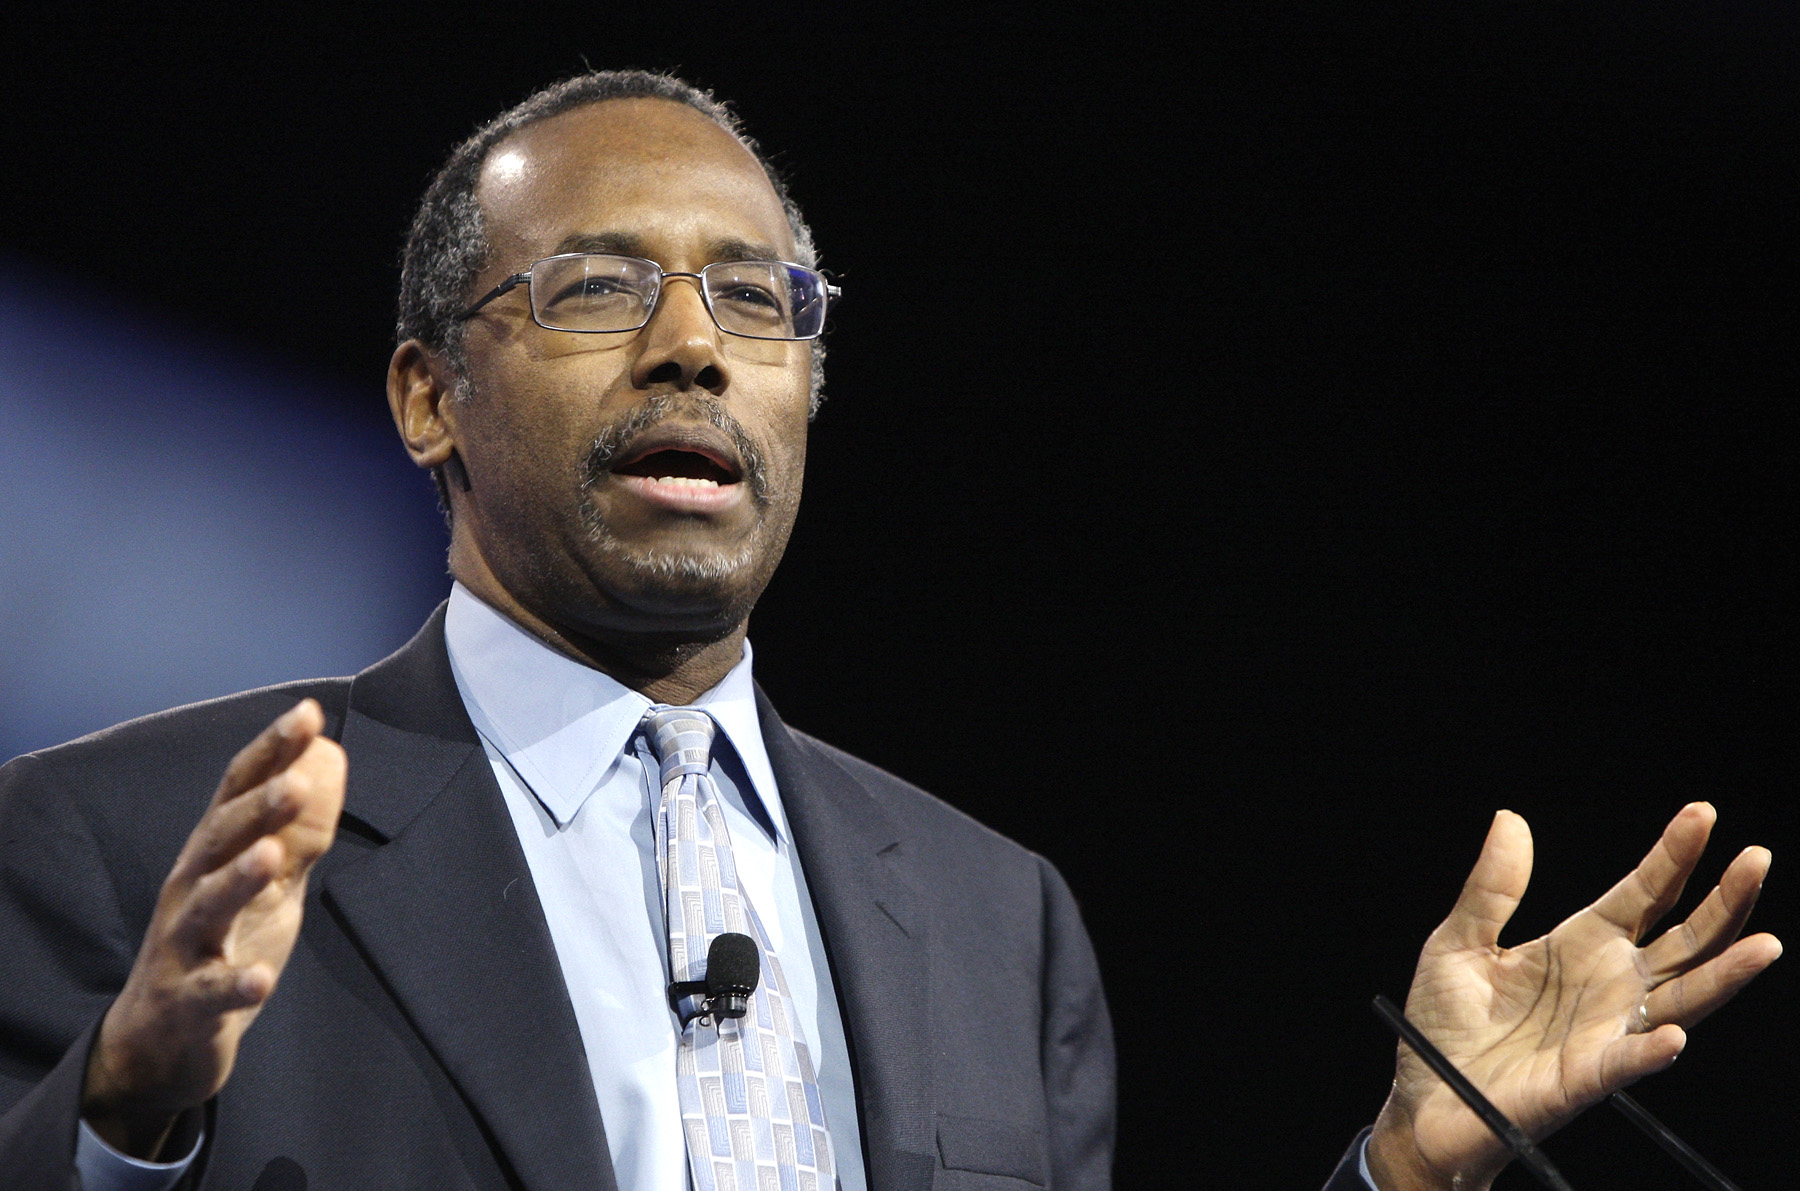 "I would not advocate that we put a Muslim in charge of the Church," said Carson.